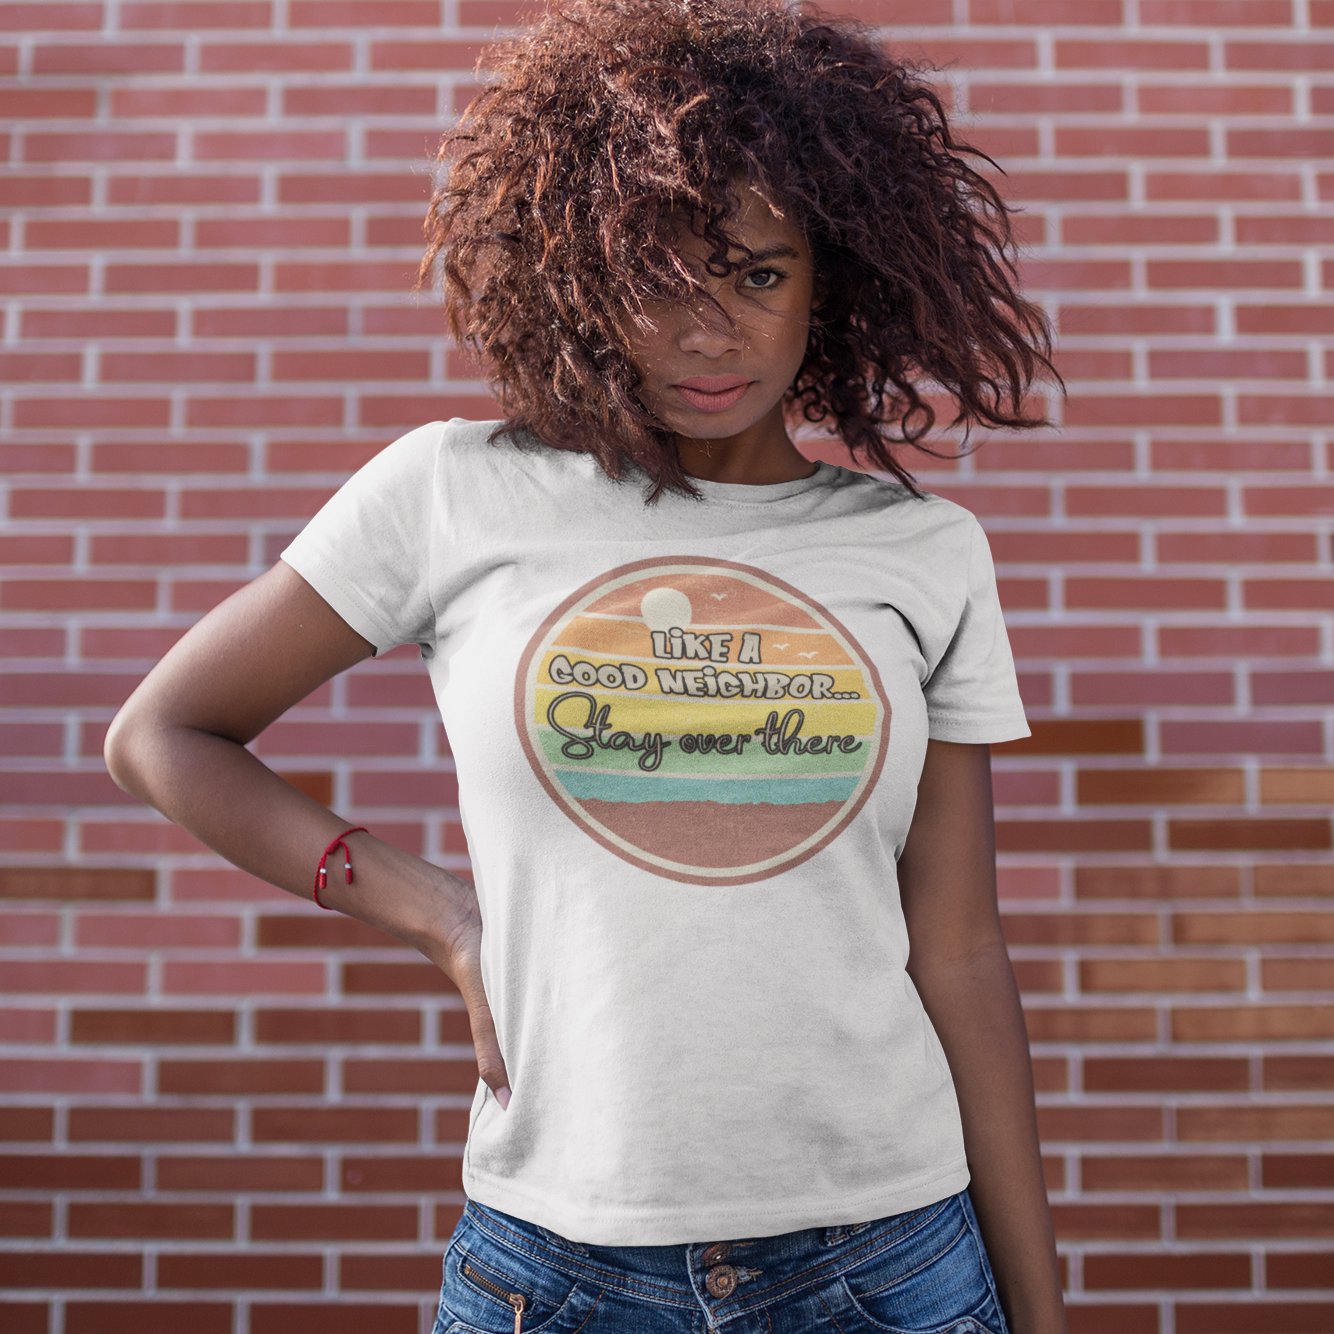 Like A Good Neighbor, Stay Over There: Social Distance Guardian T-shirt – Where Humor Meets Responsible Fashion!